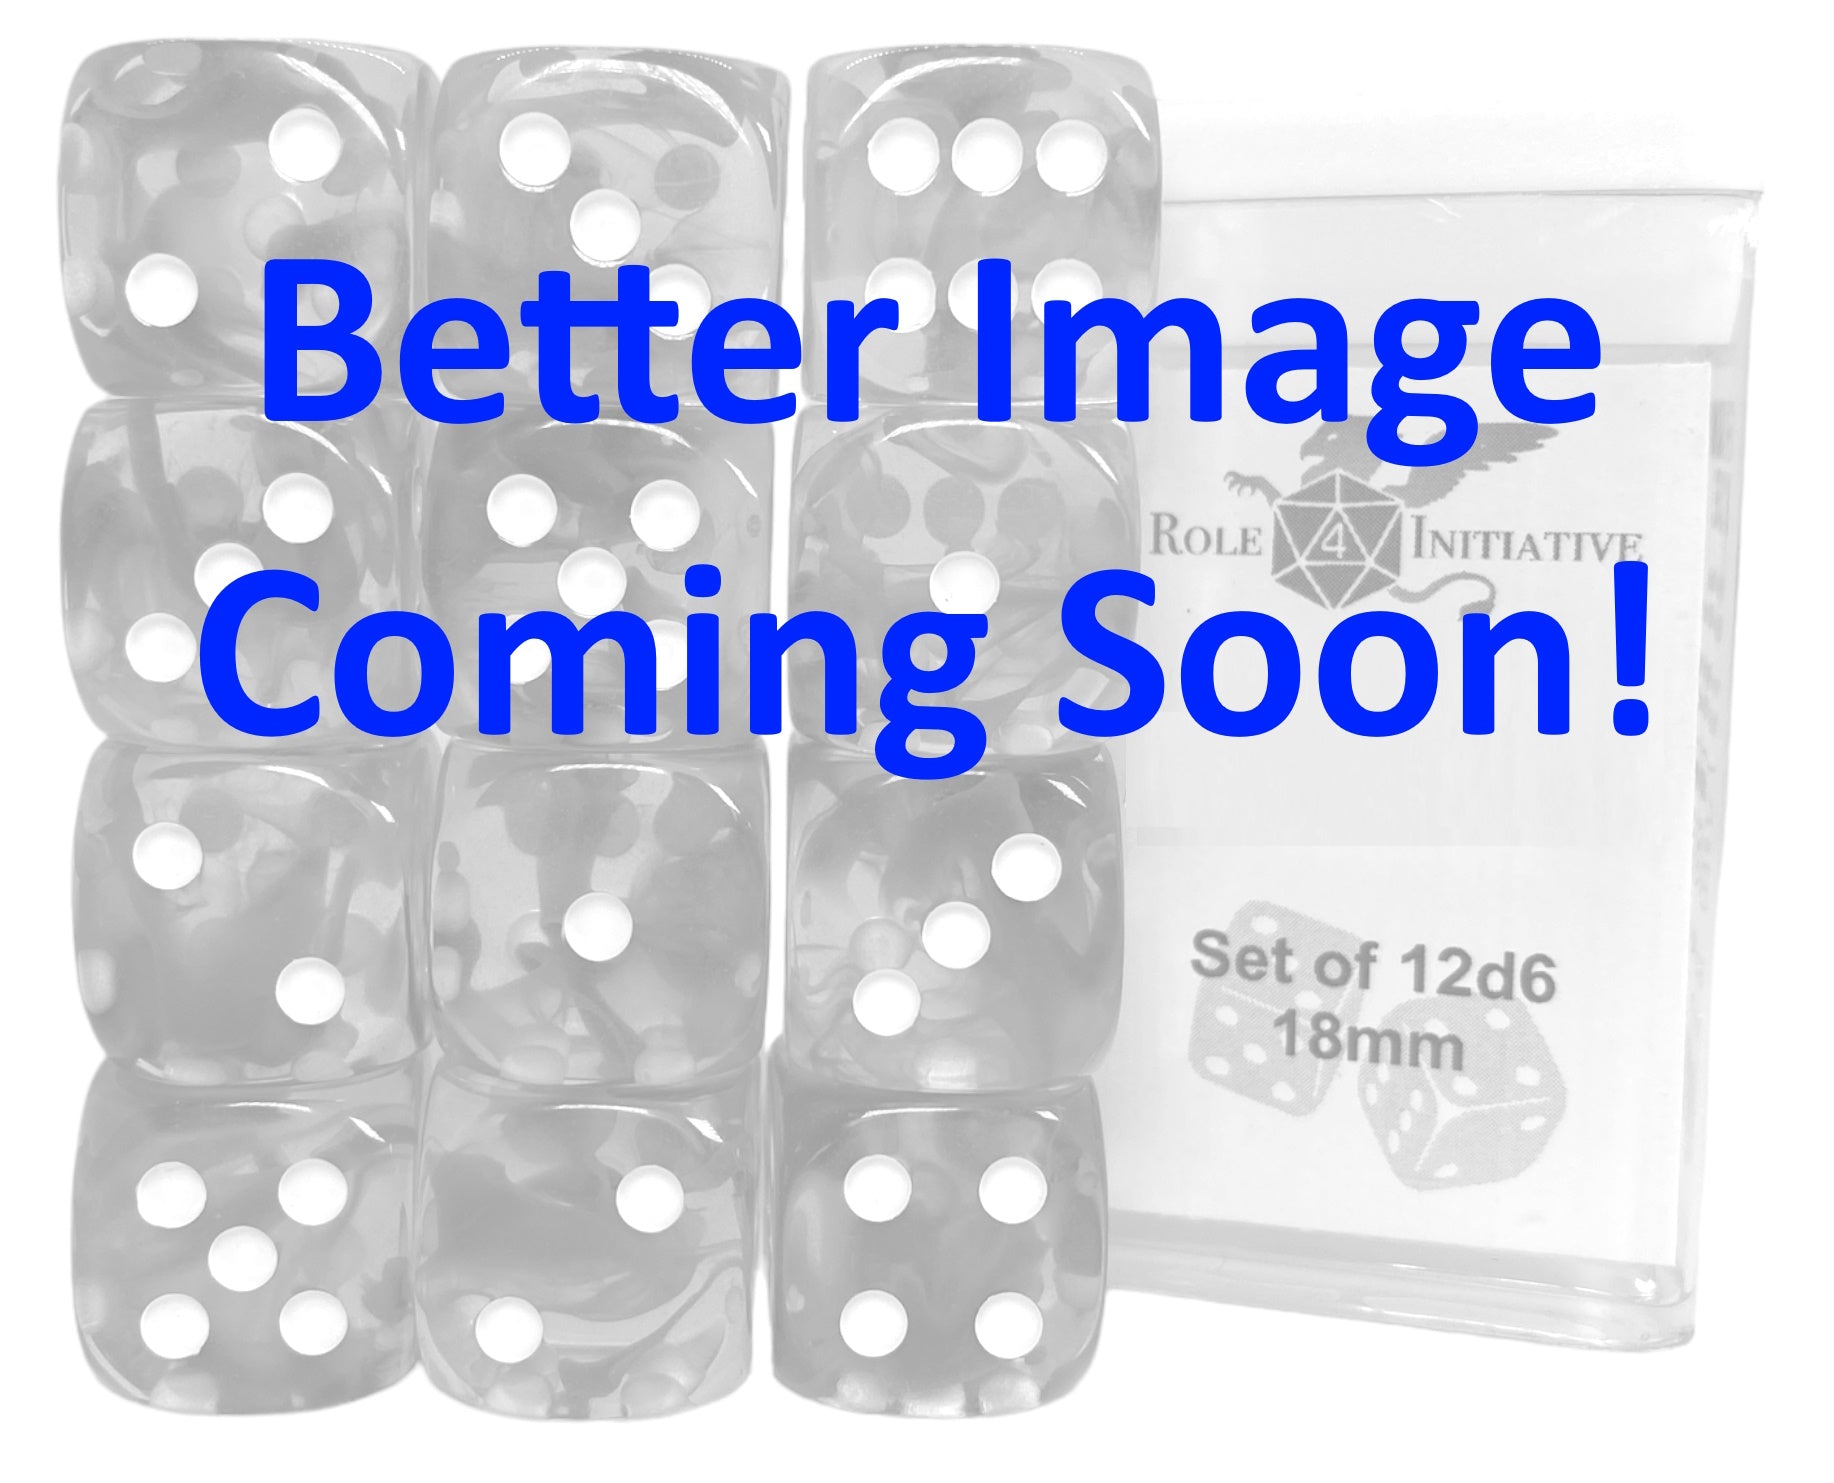 Set of 12d6 18mm w/ pips Diffusion Classes & Creatures Artificer's Ingenuity